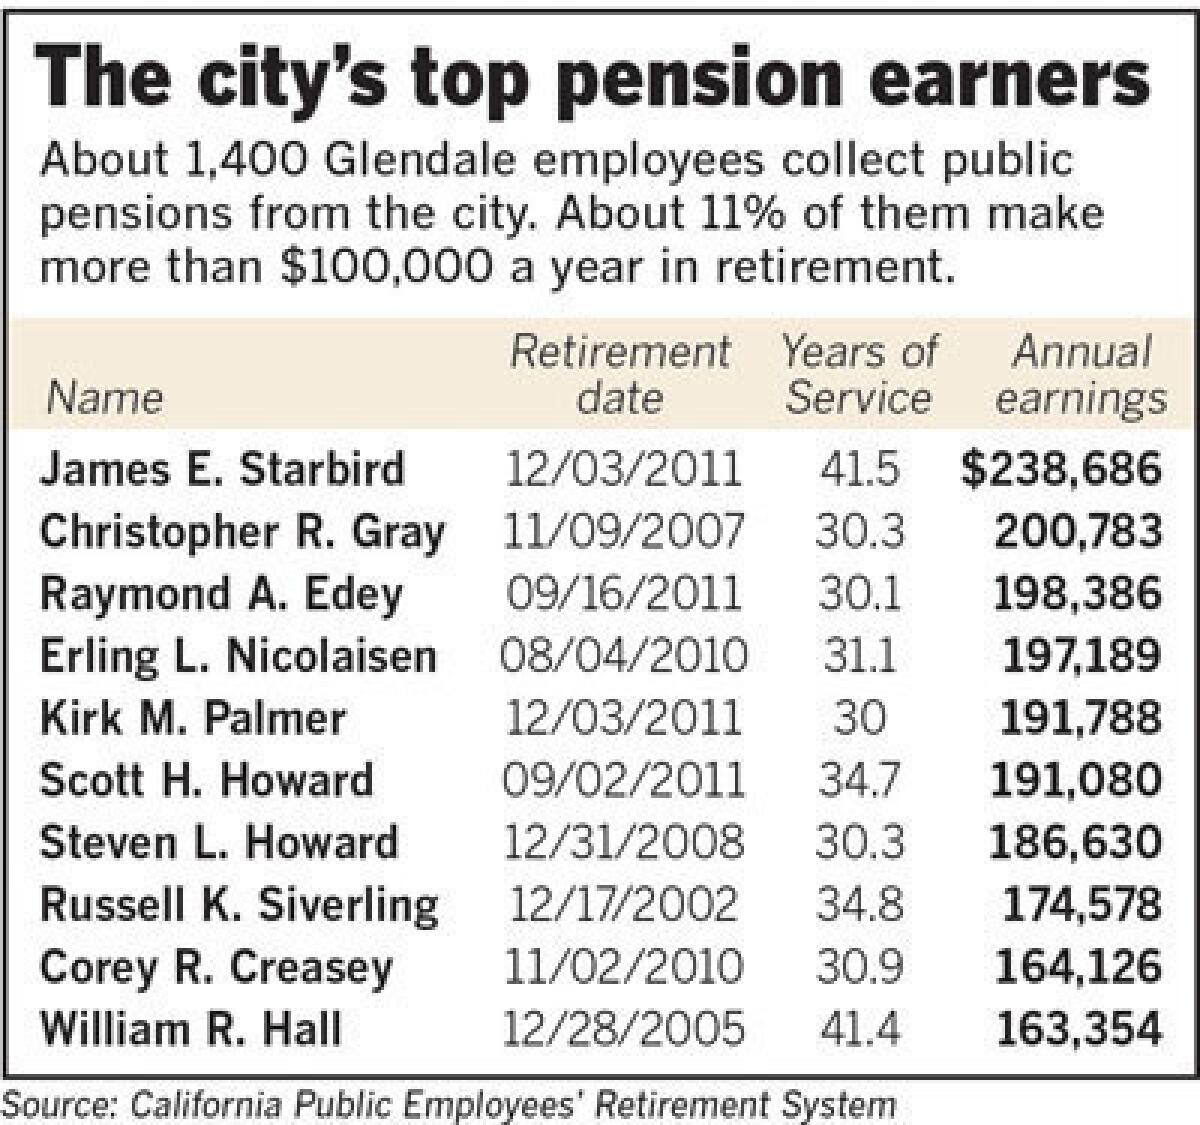 Public records show that about 11% of the nearly 1,400 city retirees draw annual pensions of more than $100,000 a year - and some of them far more than that. Former City Manager Jim Starbird draws $238,686, followed by ex-Fire Chief Christopher Gray at $200,783 and former Police Capt. Ray Edey at $198,386 at the top of the list.